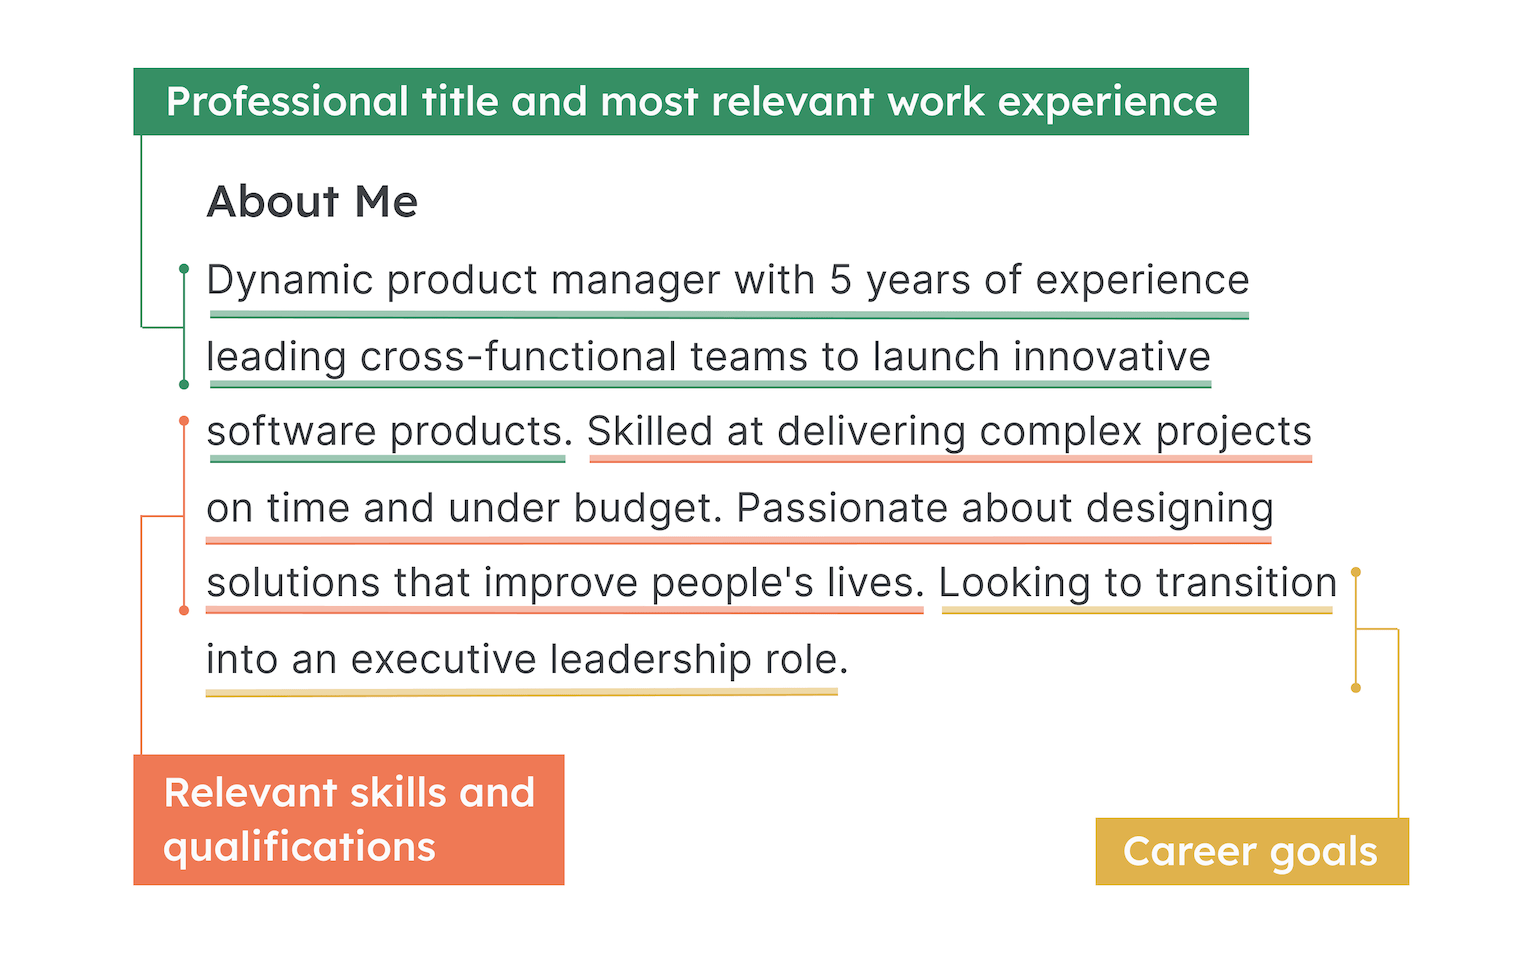 An example of an About Me section for a resume, with relevant requirements highlighted.